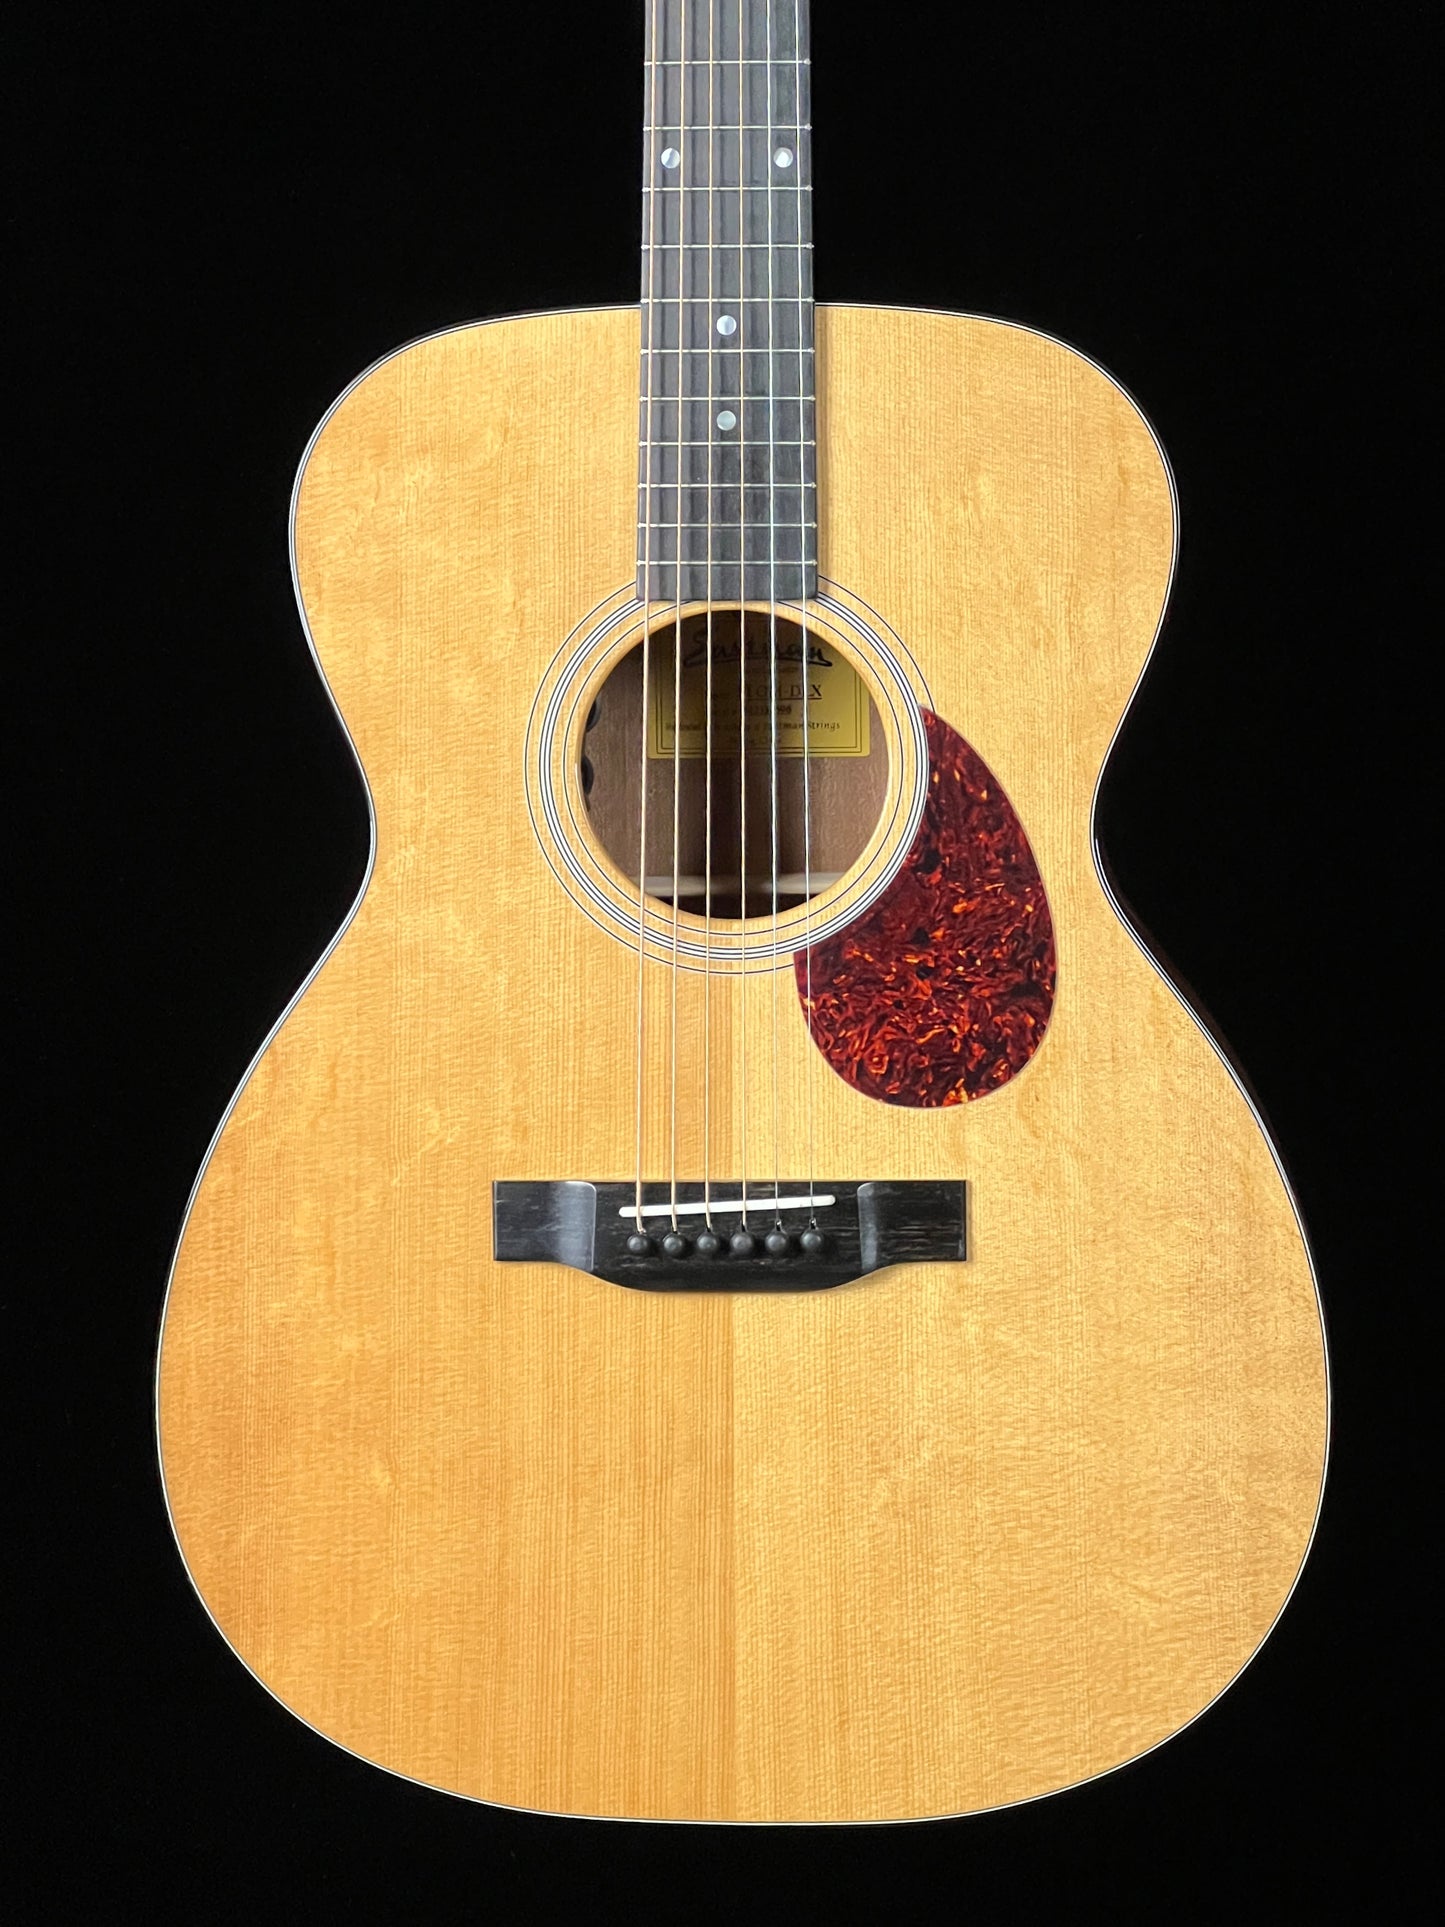 SOLD - Eastman E1 OM-DLX Sitka Spruce and Sapele Acoustic Guitar with Fishman Pick Up - New